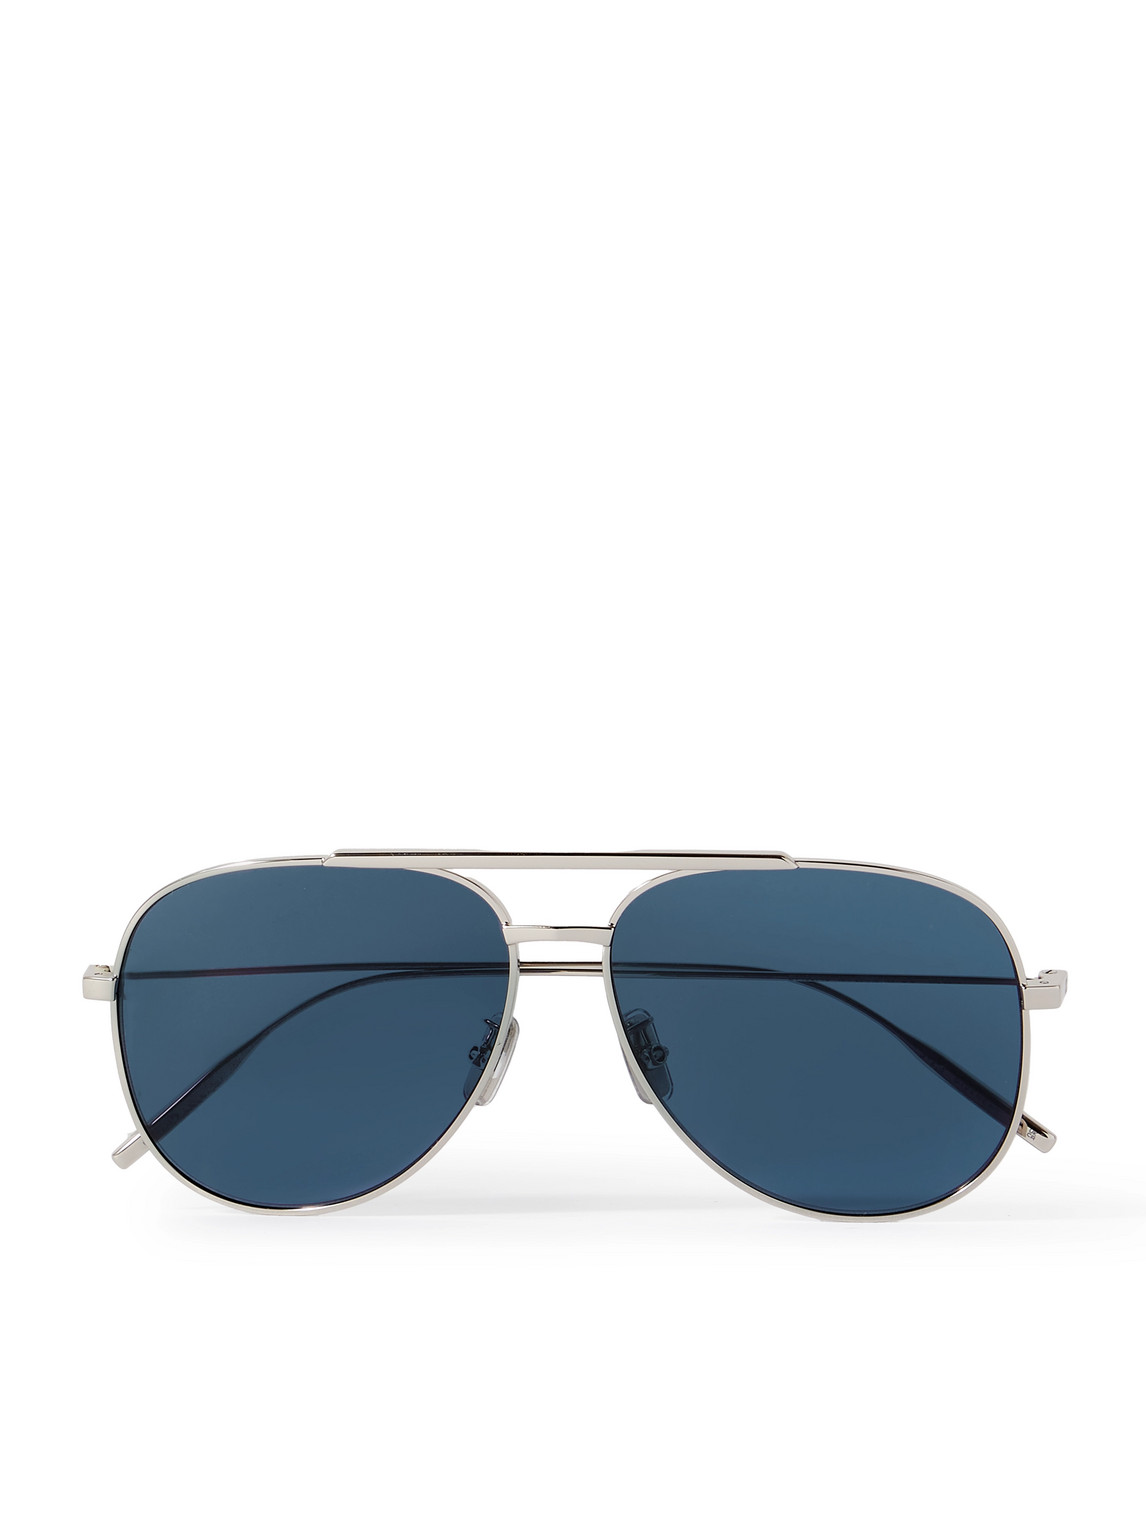 Givenchy - GV Speed Aviator-Style Silver-Tone Sunglasses - Men - Silver von Givenchy